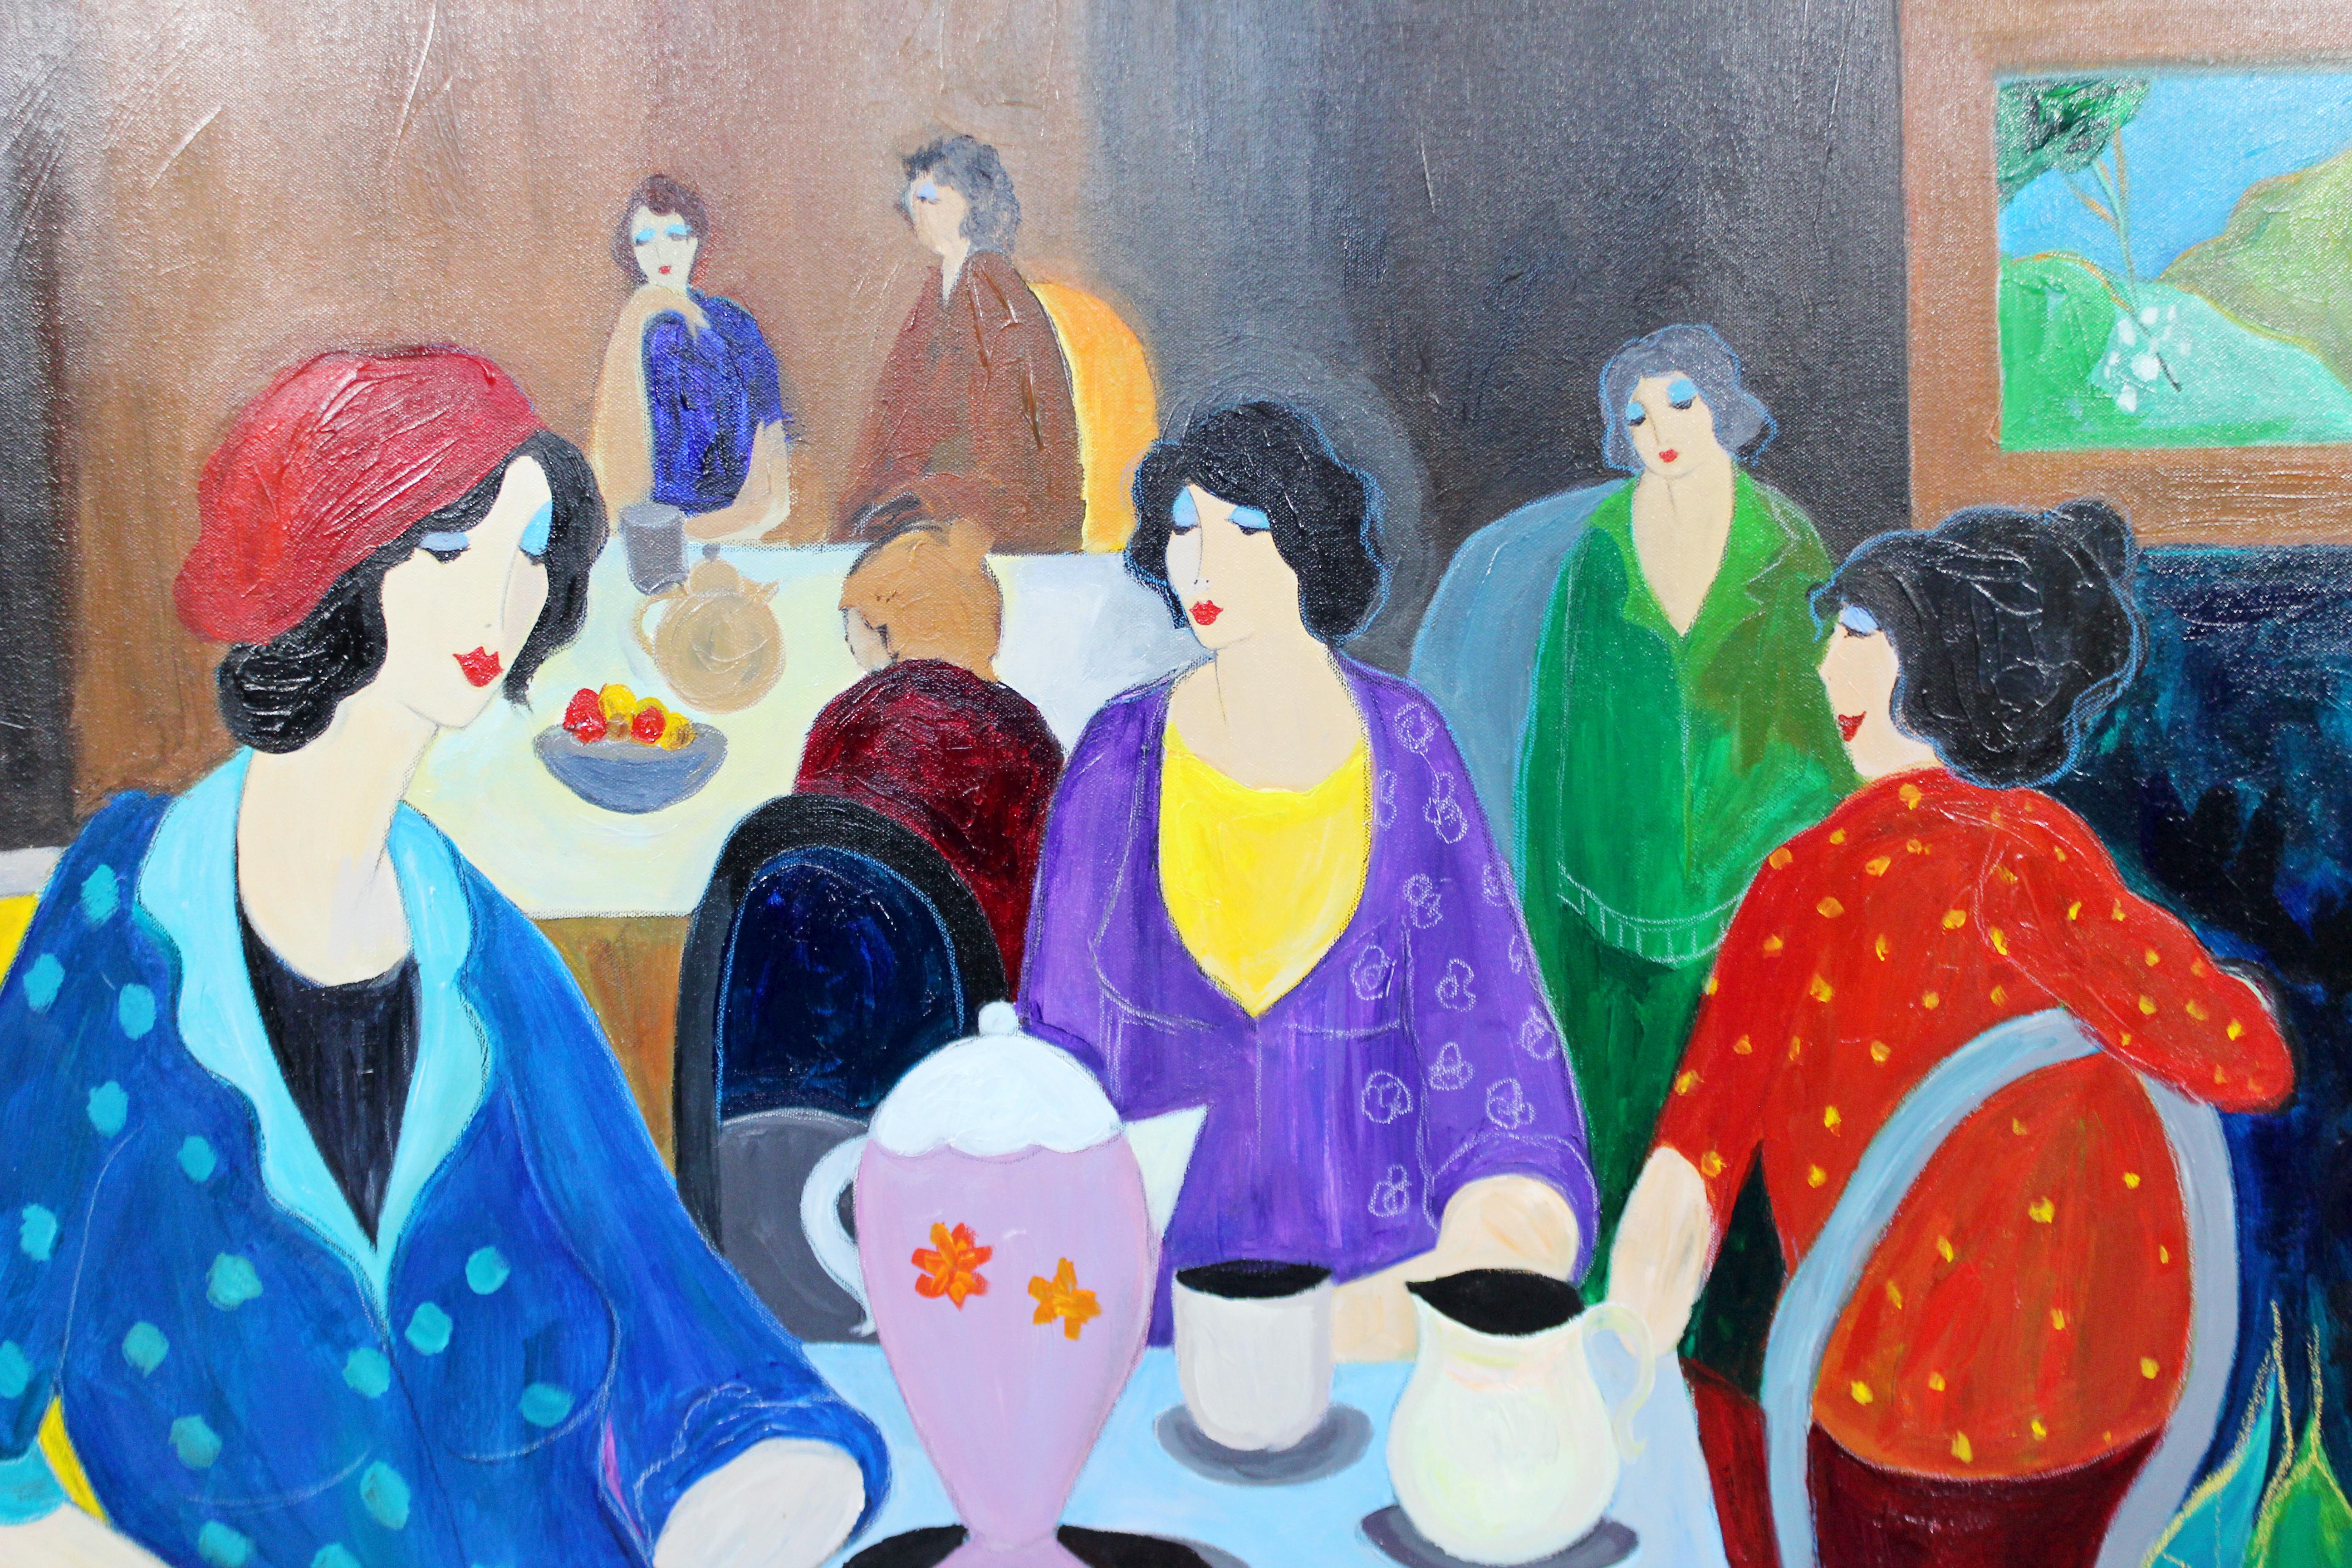 For your consideration is a phenomenal, large unique ladies at table unique acrylic on canvas, signed by artist in gold frame with gold rope.  Itzchak Tarkay is considered to be a key figure in the modern figurative movement.  Artwork by the Israeli